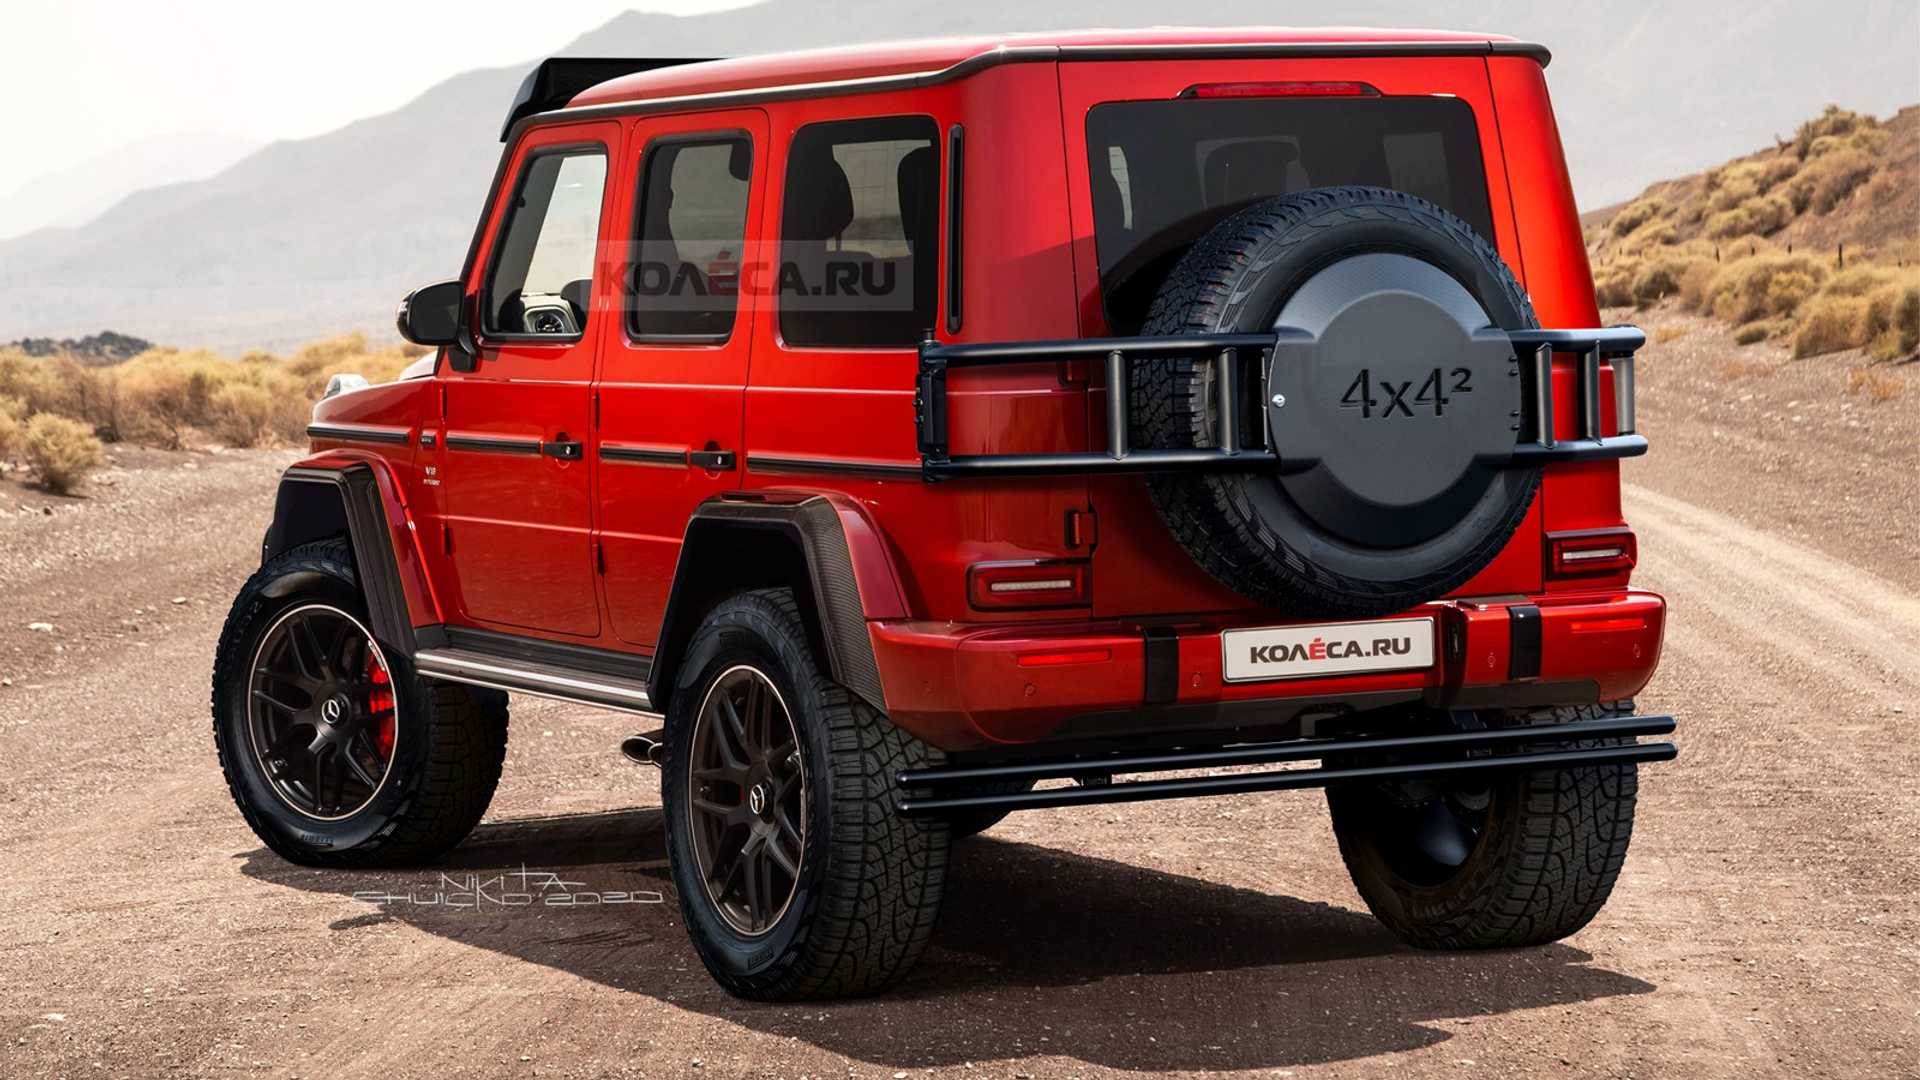 2022 Mercedes Benz G 550 4x4 Squared Looks Real In Accurate Rendering 1 